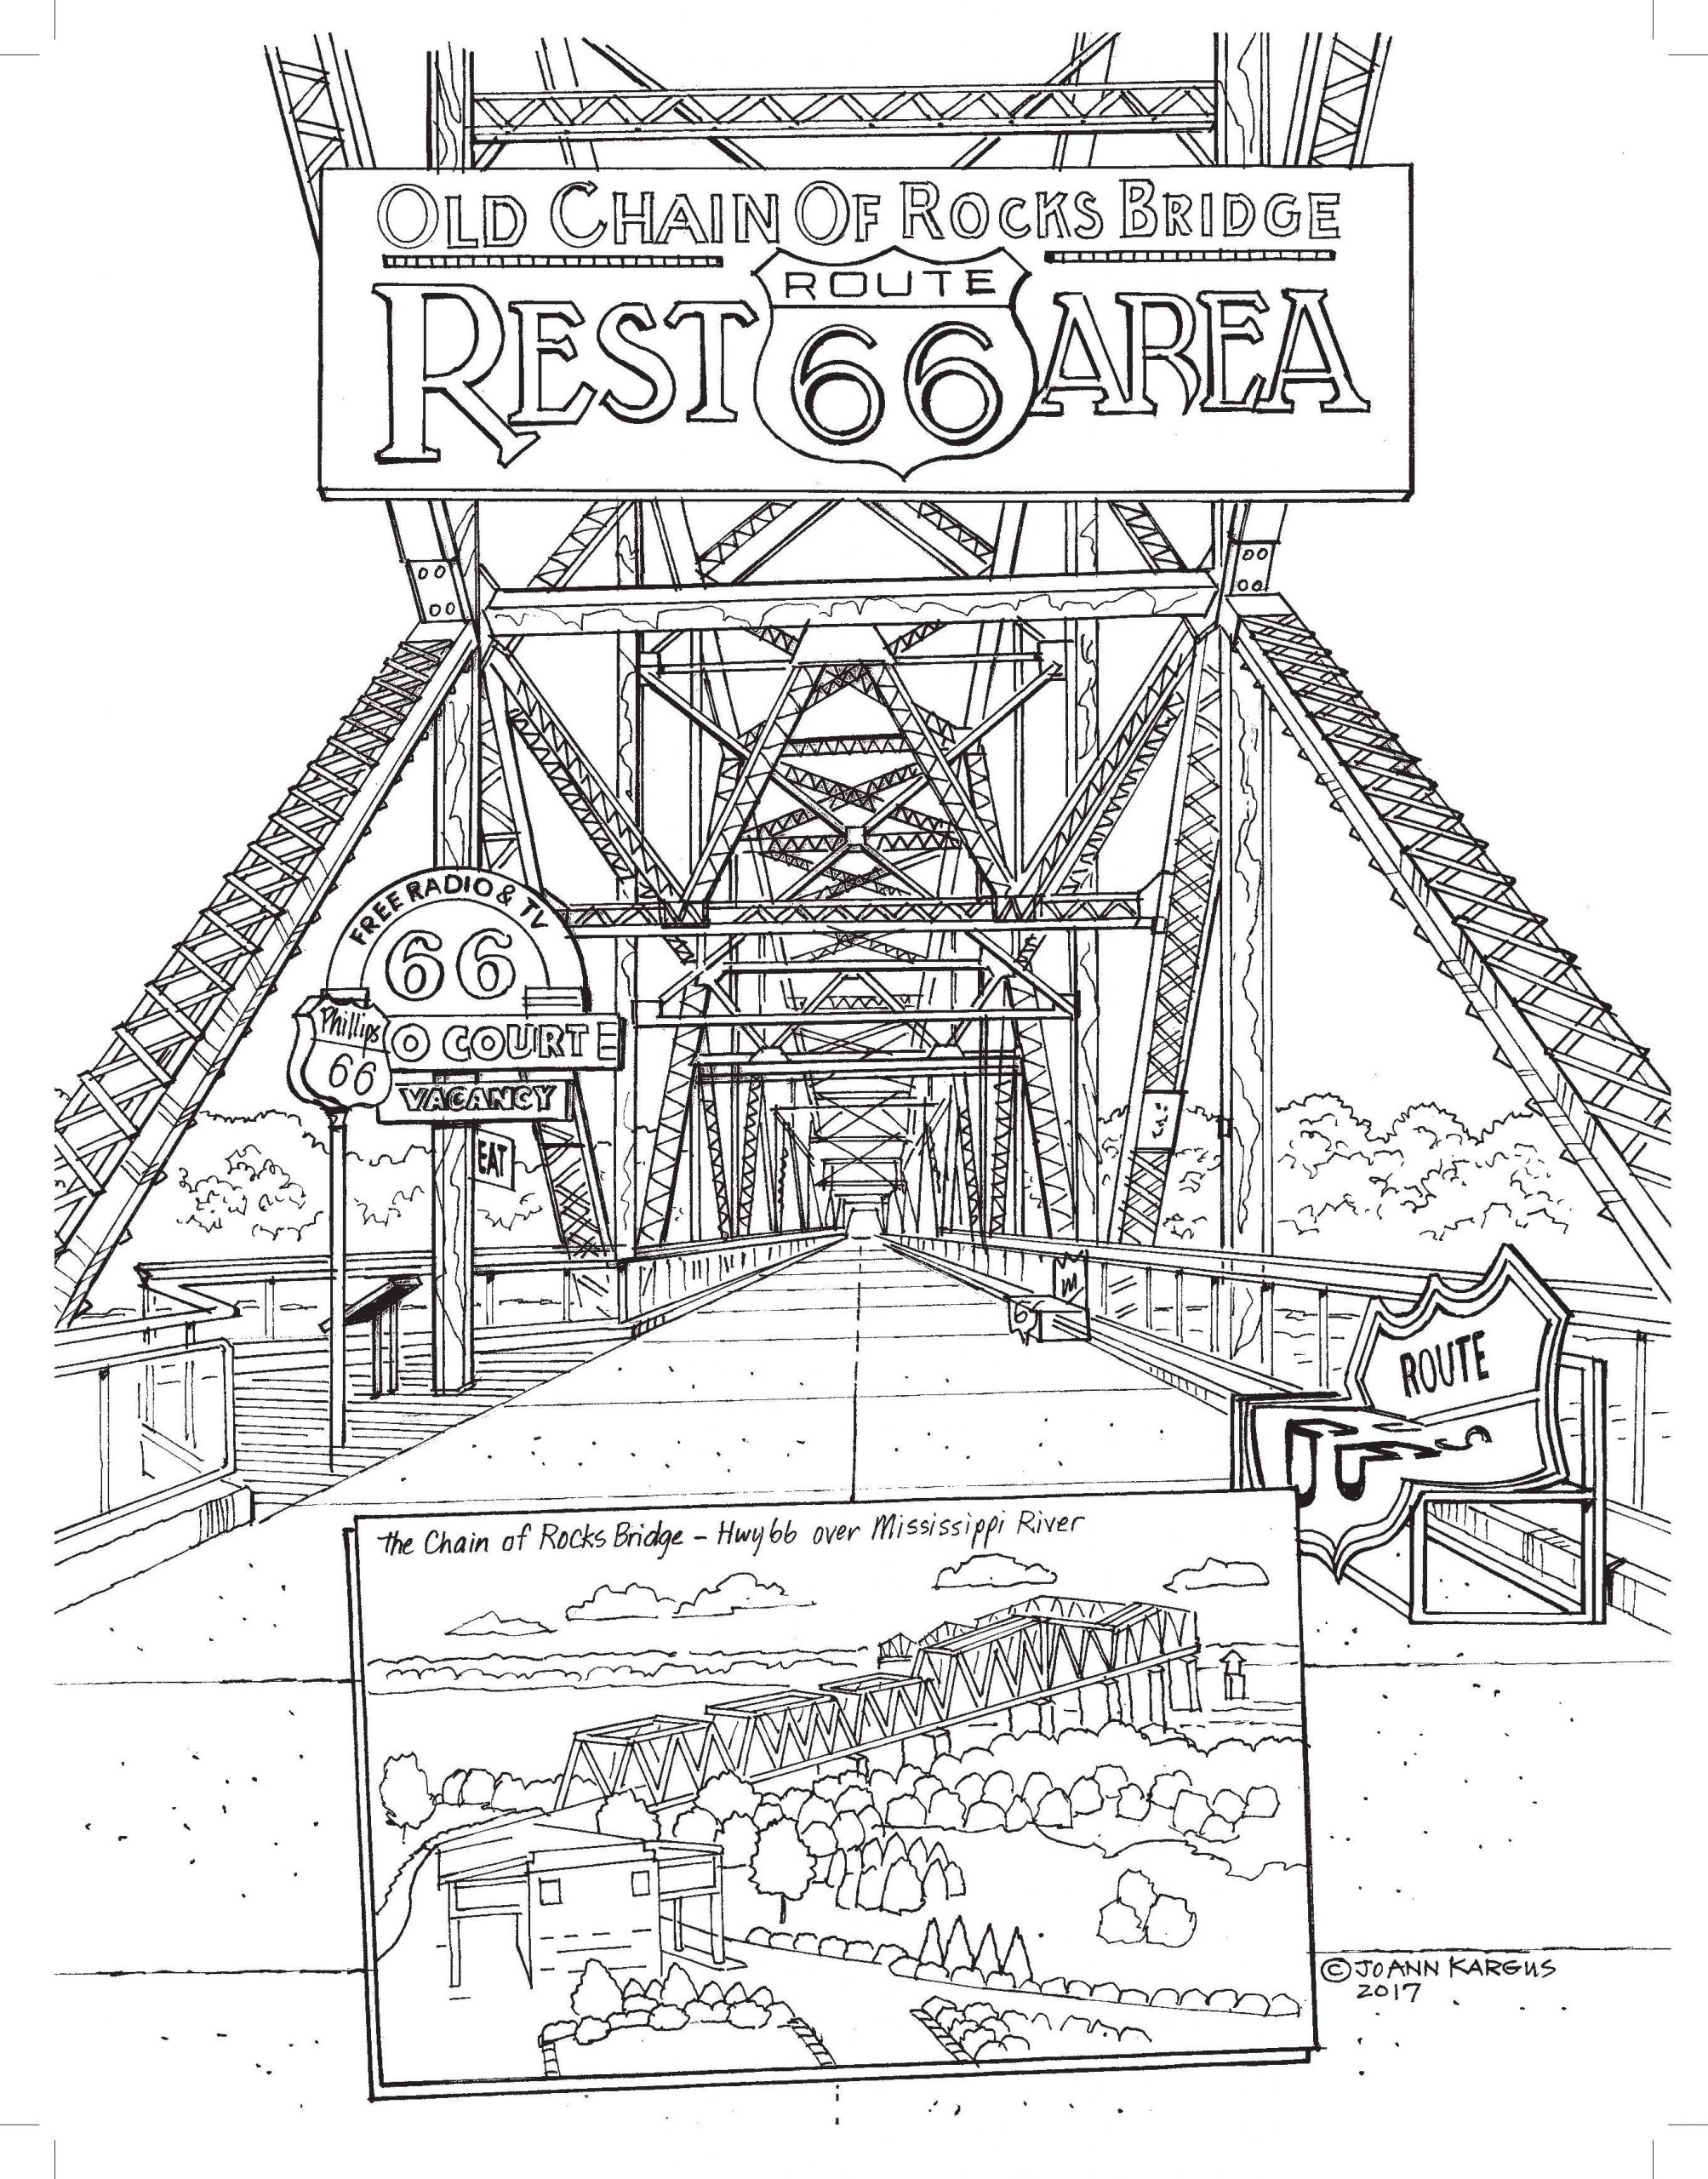 New Coloring Book For Adults
 New Adult Coloring Book Shows f the Wonders of Route 66